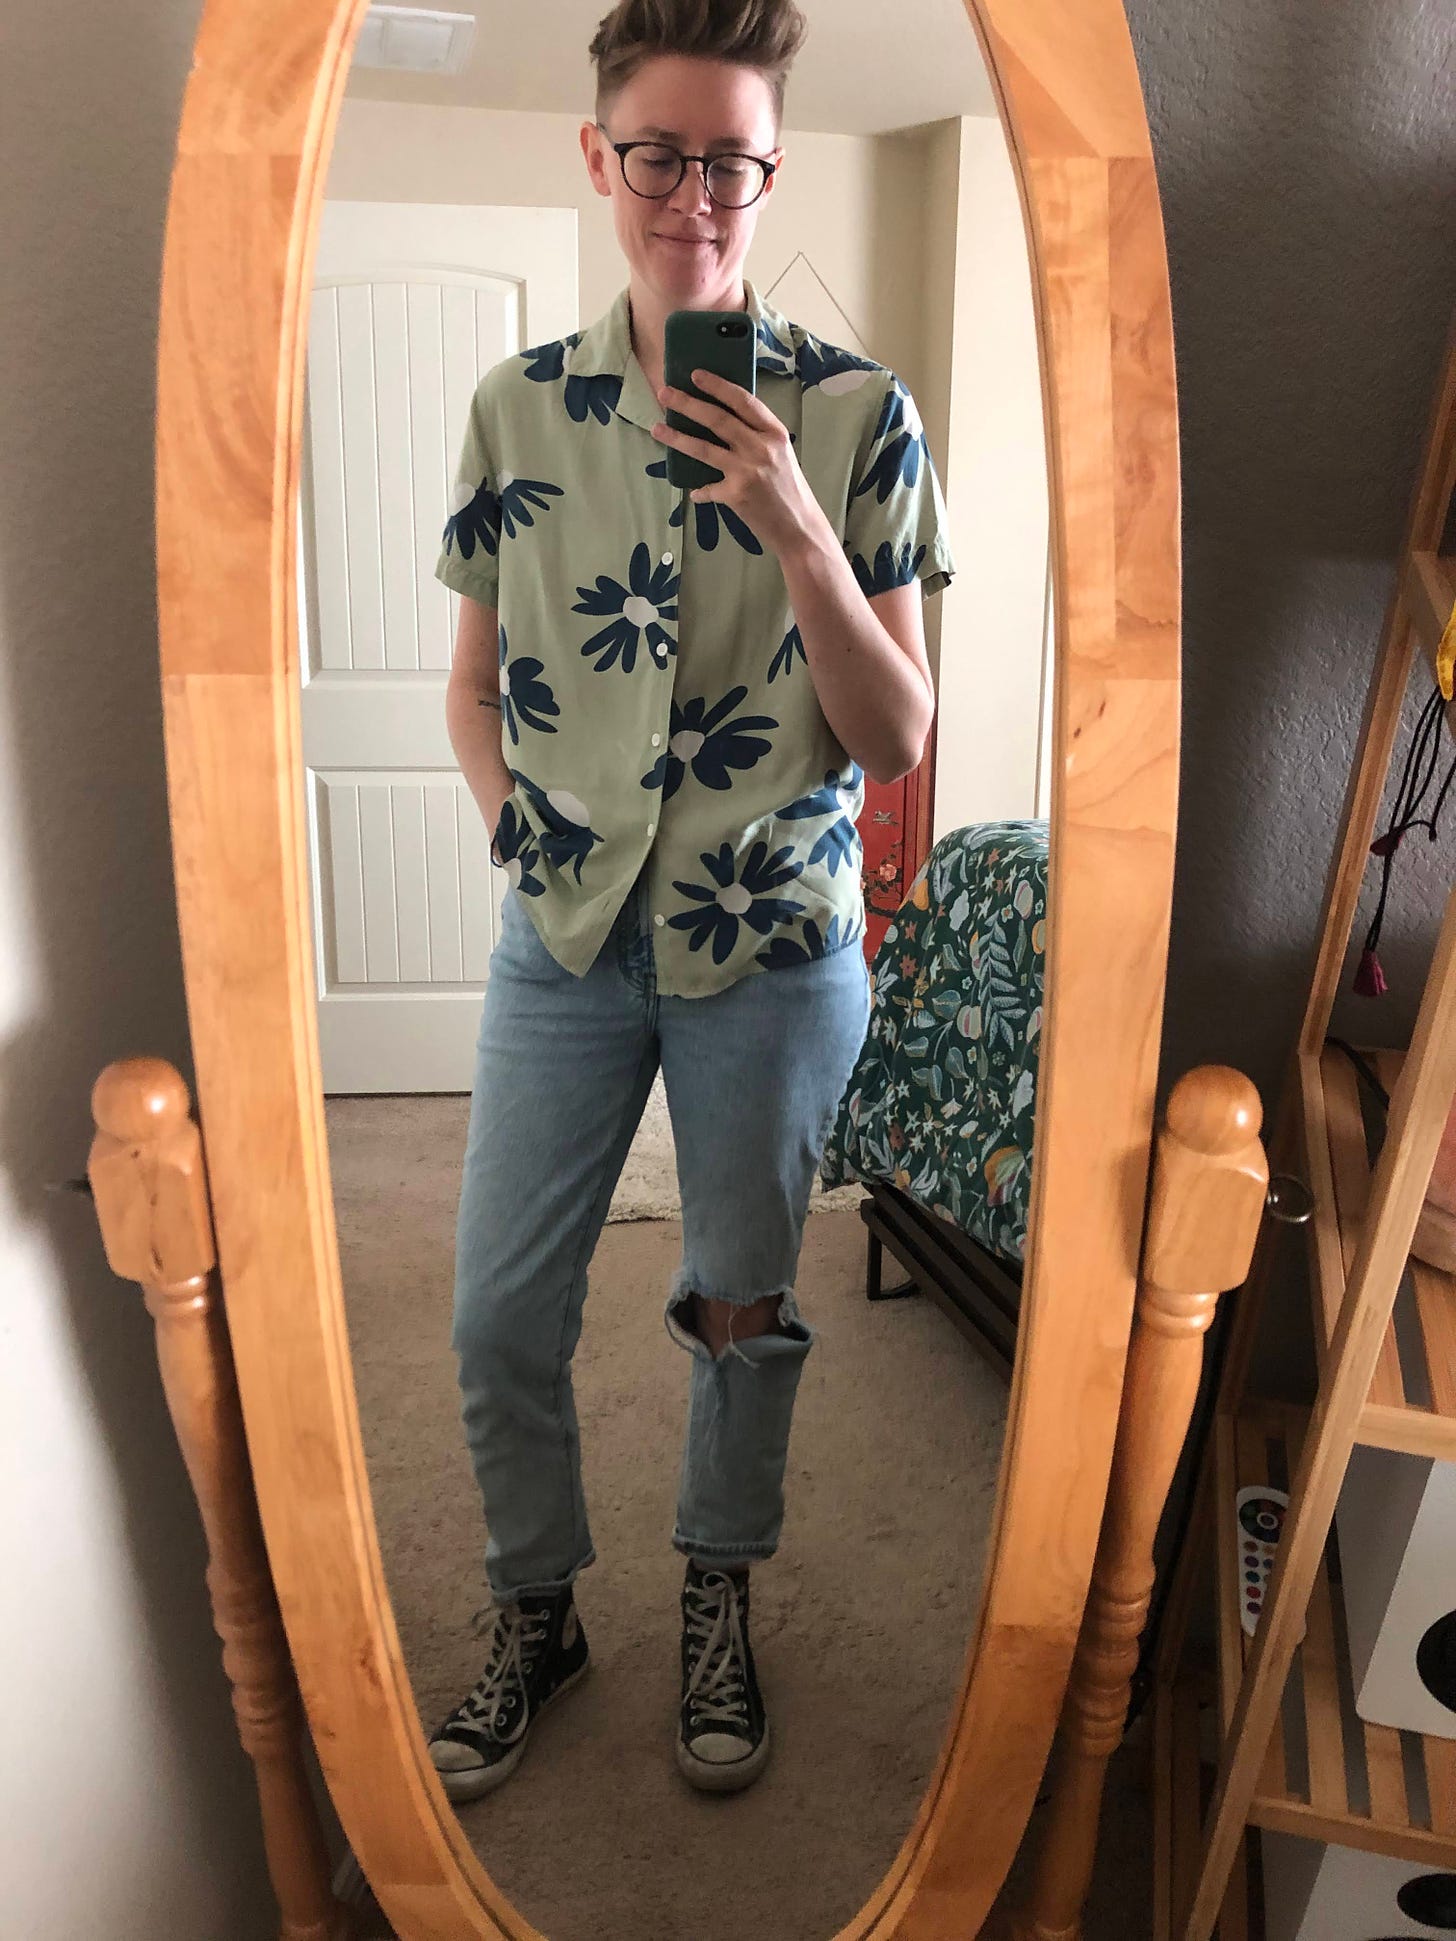 Caley wearing a floral camp shirt and pale denim.